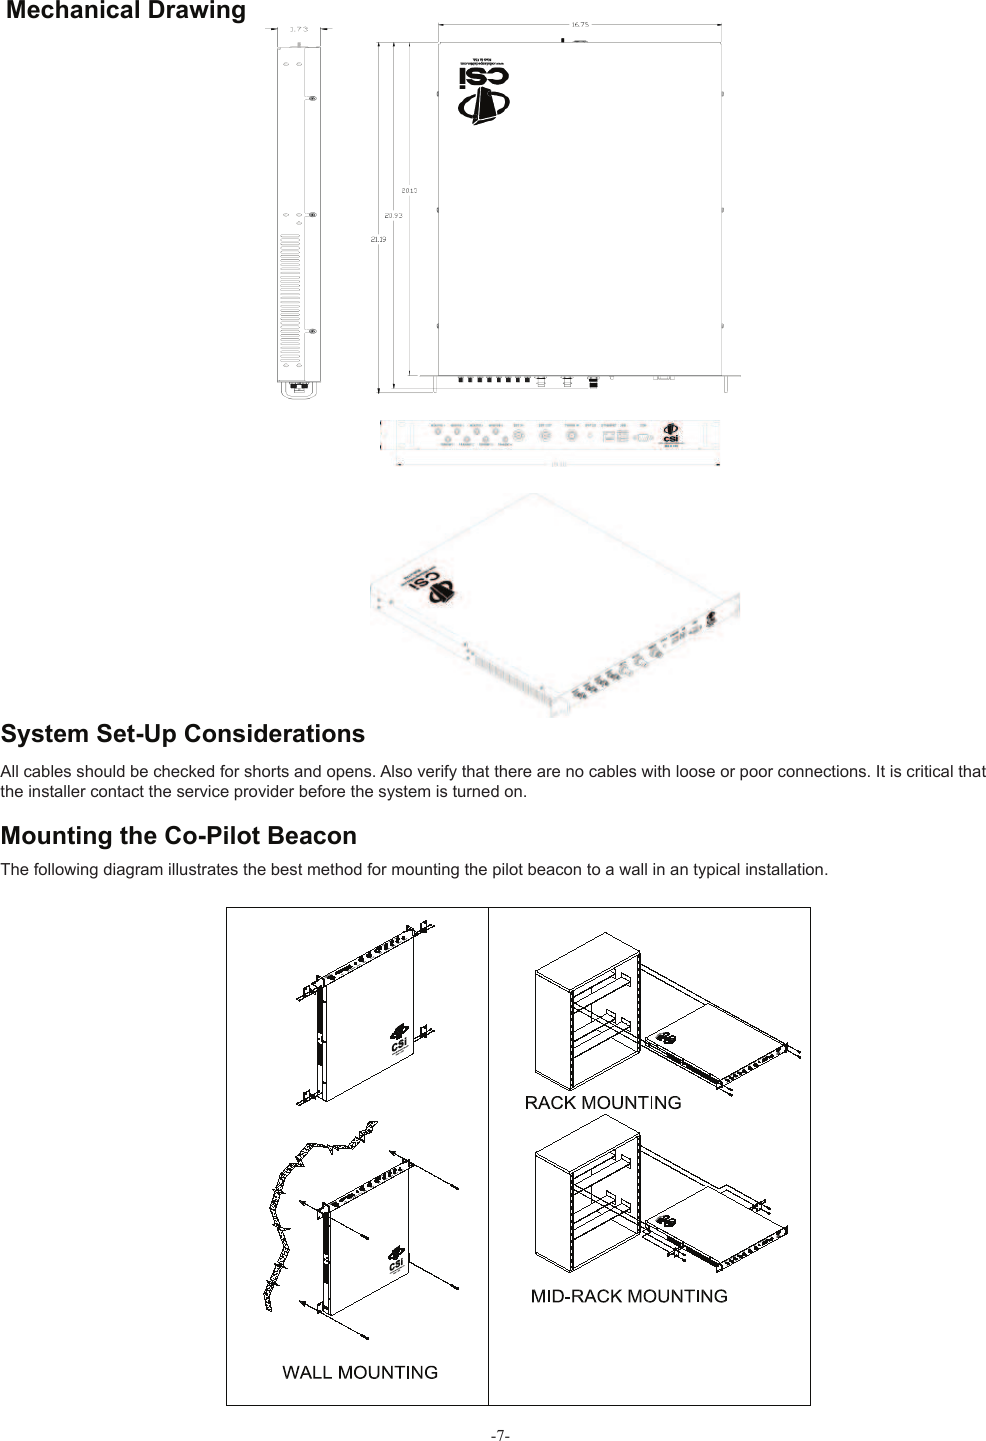 -7-  Mechanical Drawing All cables should be checked for shorts and opens. Also verify that there are no cables with loose or poor connections. It is critical that the installer contact the service provider before the system is turned on.The following diagram illustrates the best method for mounting the pilot beacon to a wall in an typical installation.  System Set-Up ConsiderationsMounting the Co-Pilot Beacon